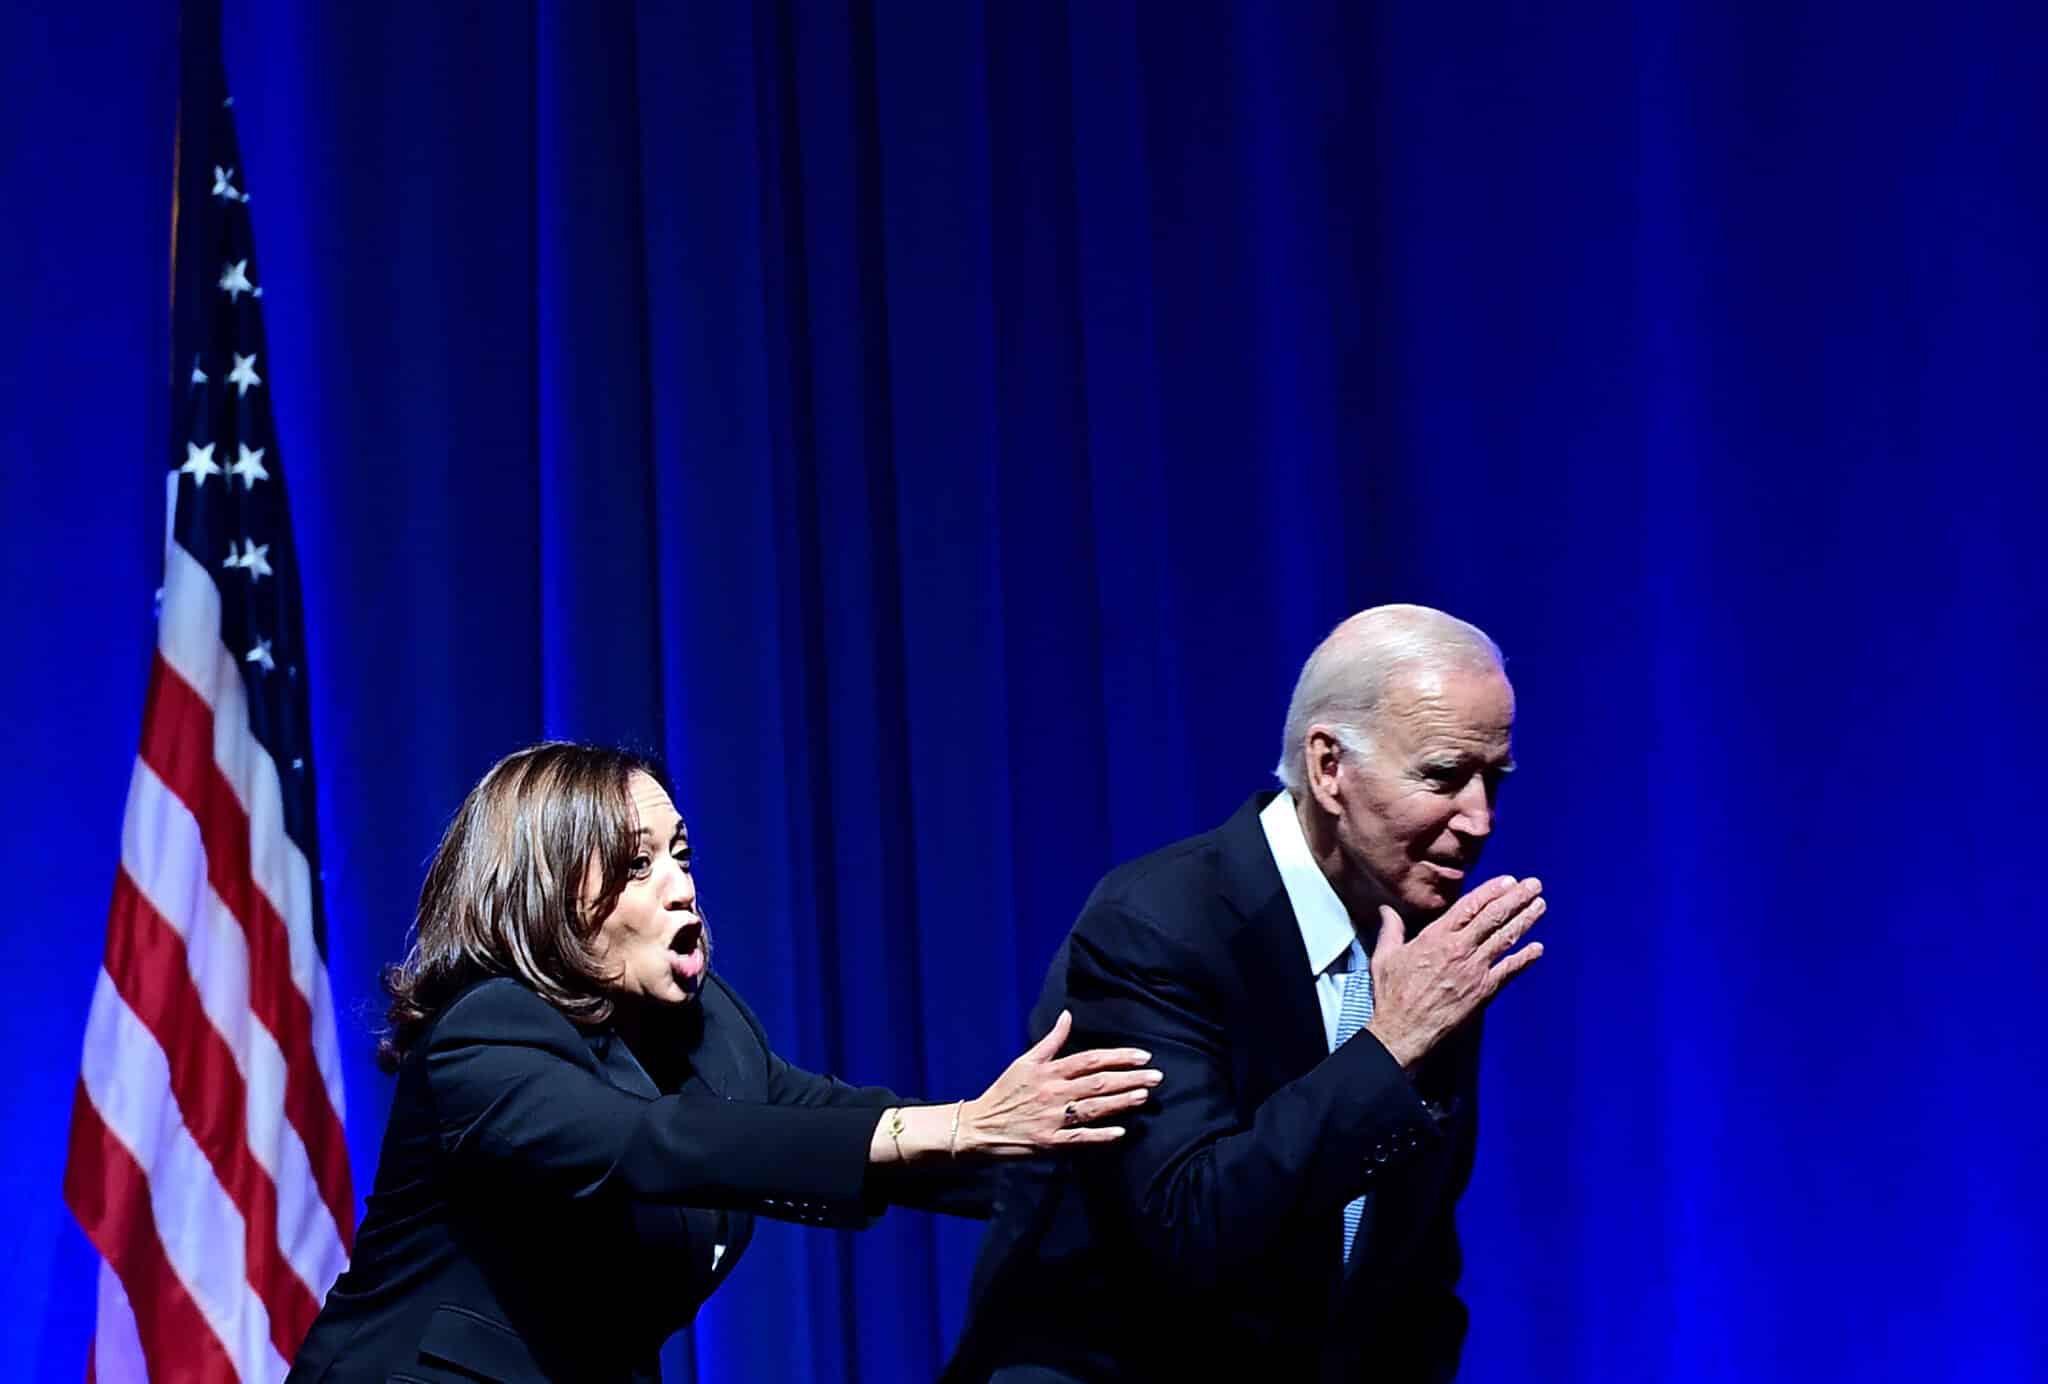 PHILADELPHIA, PA - OCTOBER 28:  US President Joe Biden and US Vice President Kamala Harris react while greeting supporters during the Democratic Party's Independence Dinner on October 28, 2022 in Philadelphia, Pennsylvania. Election Day will be held on November 8.  (Photo by Mark Makela/Getty Images)